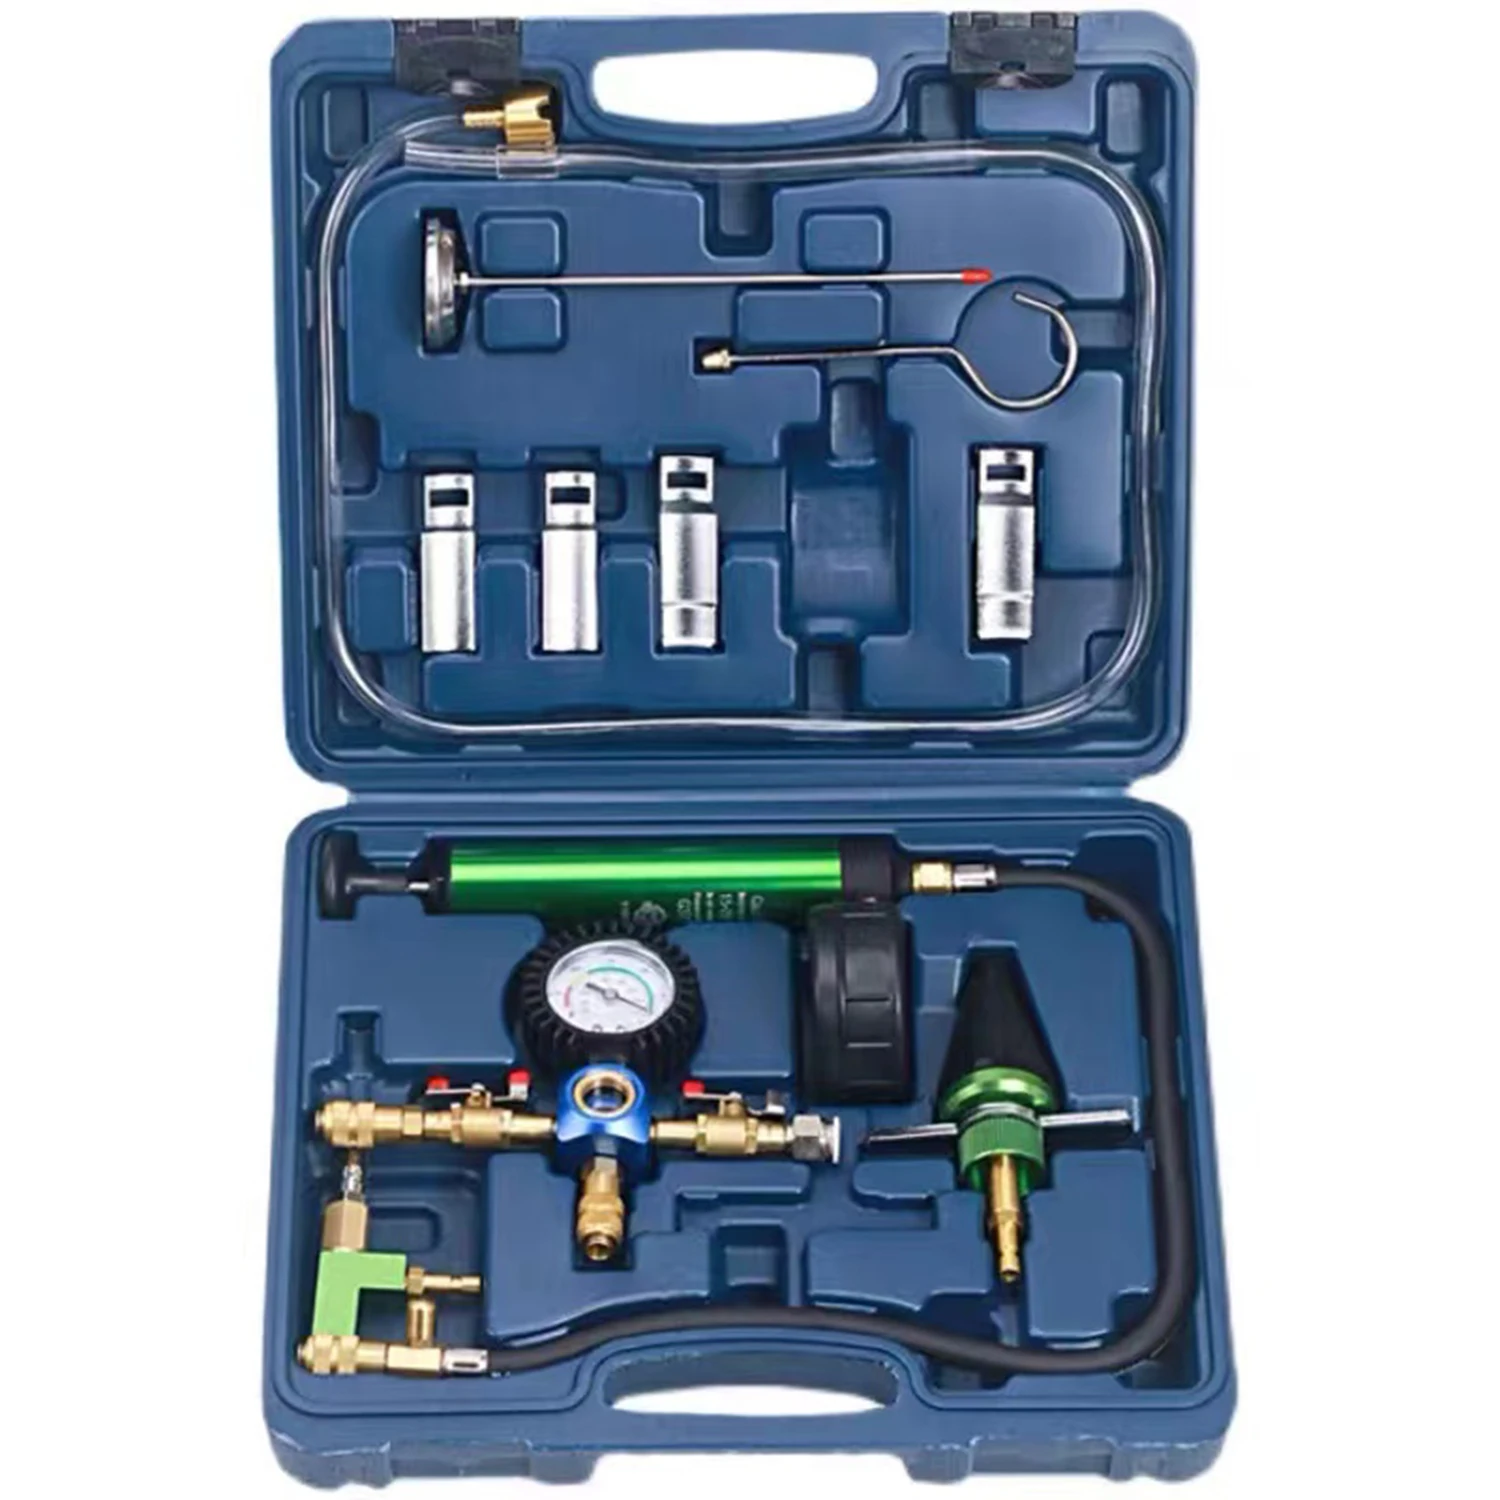 Professional Radiator Pressure Tester Kit and Vacuum Type Coolant Refilling Kit with Universal Rubber Radiator